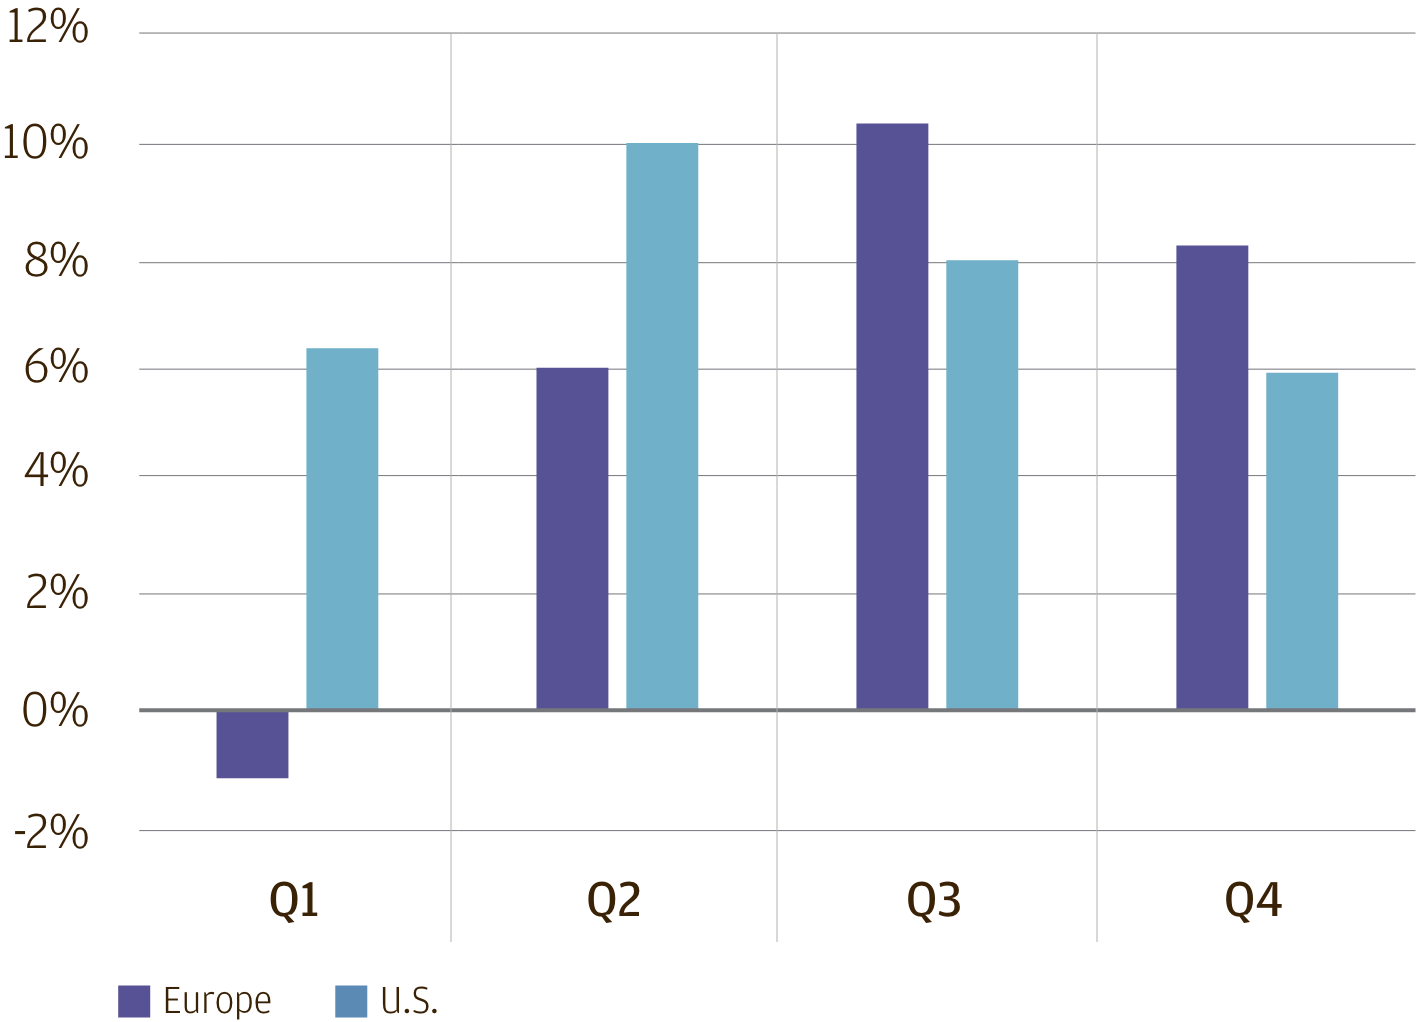 This chart displays the Private Bank’s outlook for annualized quarterly GDP growth in Europe and the United States through 2021. It shows annualized growth in the United States of roughly 6% in Q1, then peaking at nearly 10% in Q2 before sliding back to 8% in Q3 and 6% in Q4. For Europe, it shows a small negative growth rate for Q1, nearly 6% growth in Q2, and then roughly 10% growth in each of Q3 and Q4.